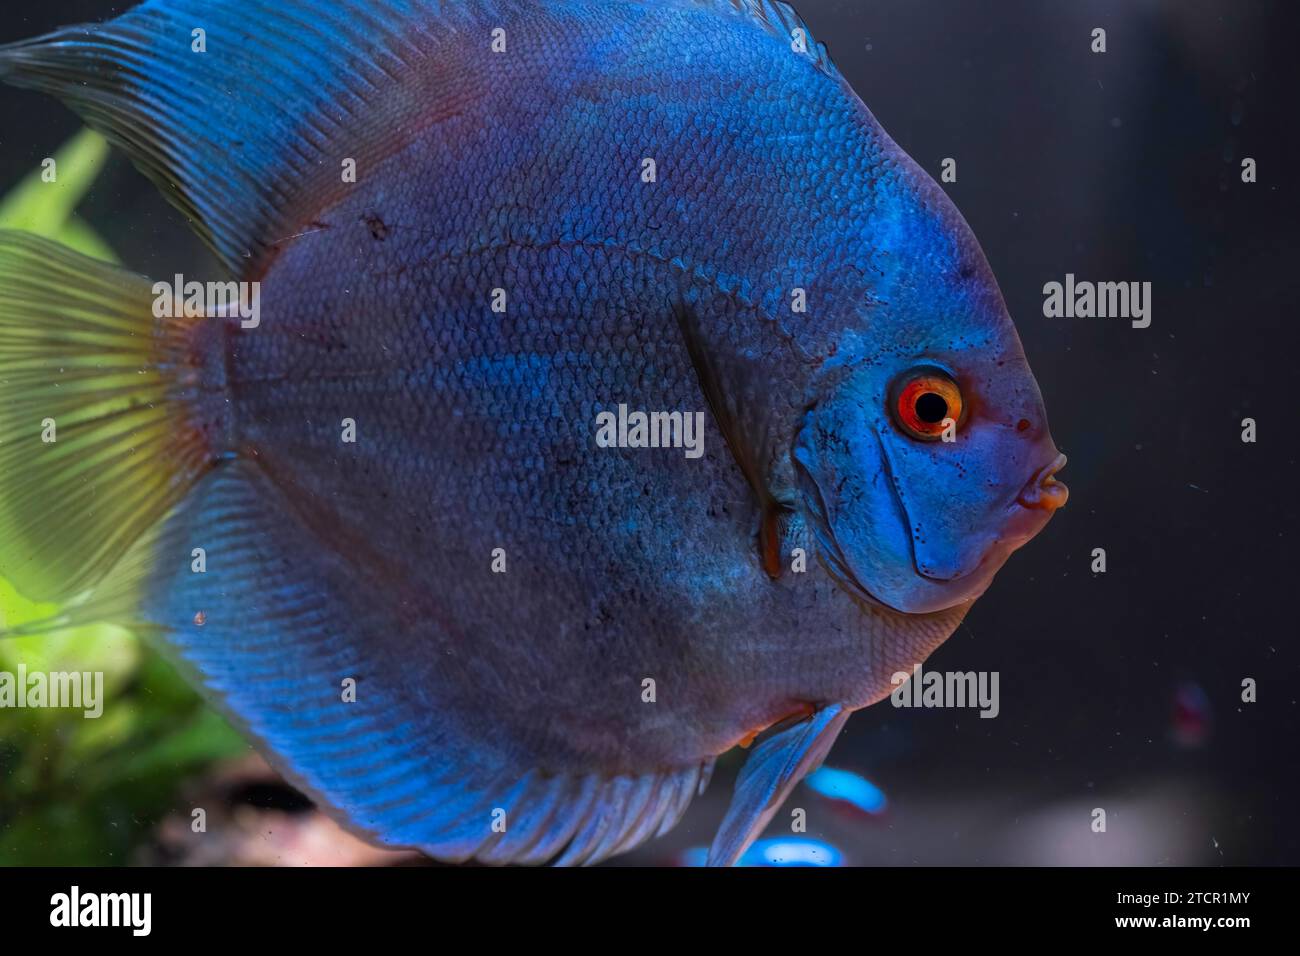 Blue fish from the spieces discus (Symphysodon) in aquarium. Freshwater aquaria concept Stock Photo